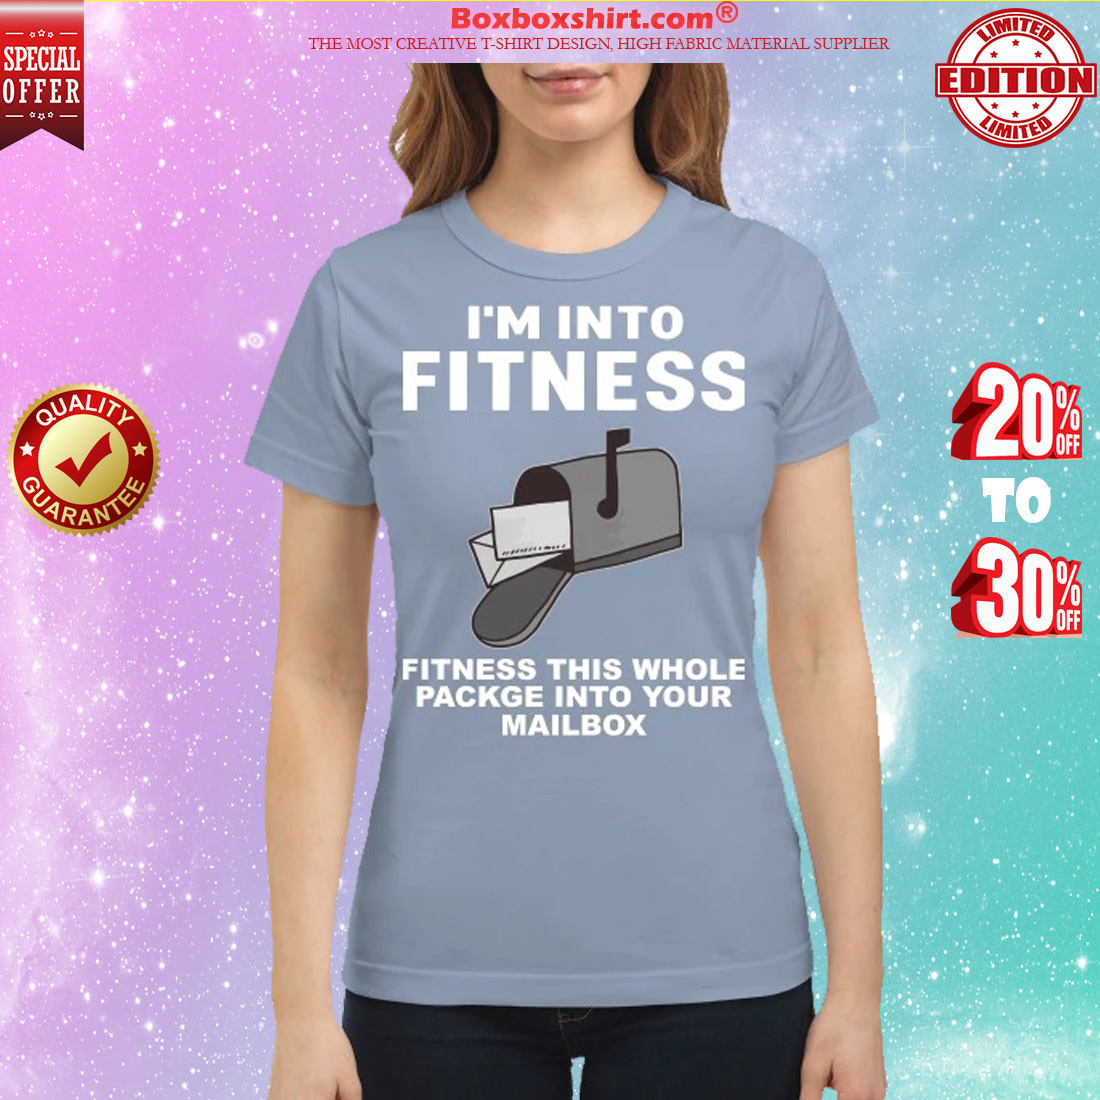 I'm into fitness fitness this whole package into your mailbox classic shirt